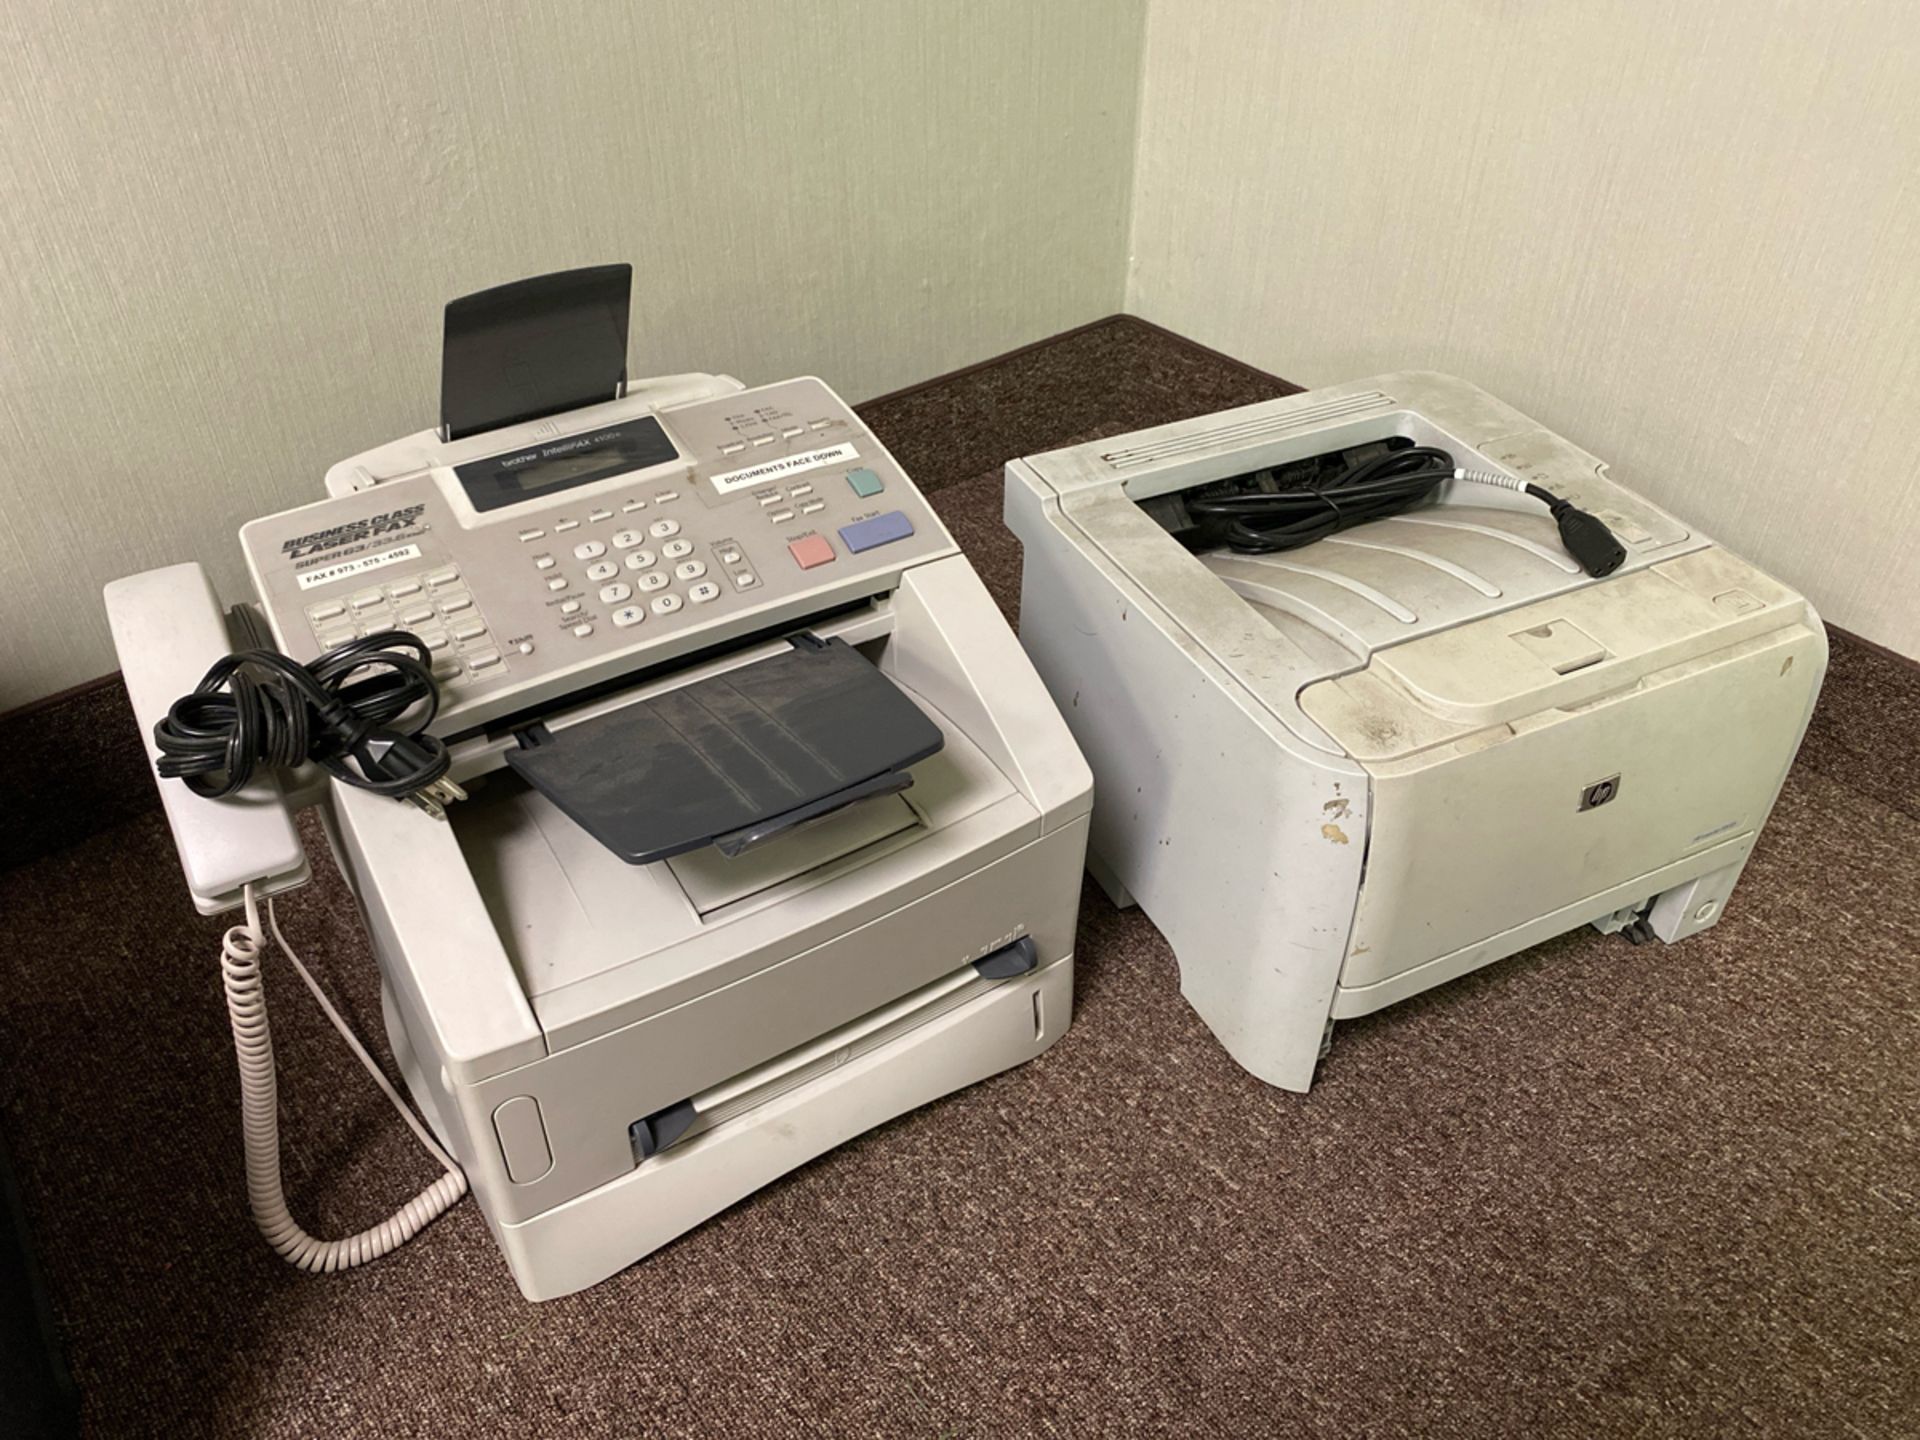 A Group of Printers